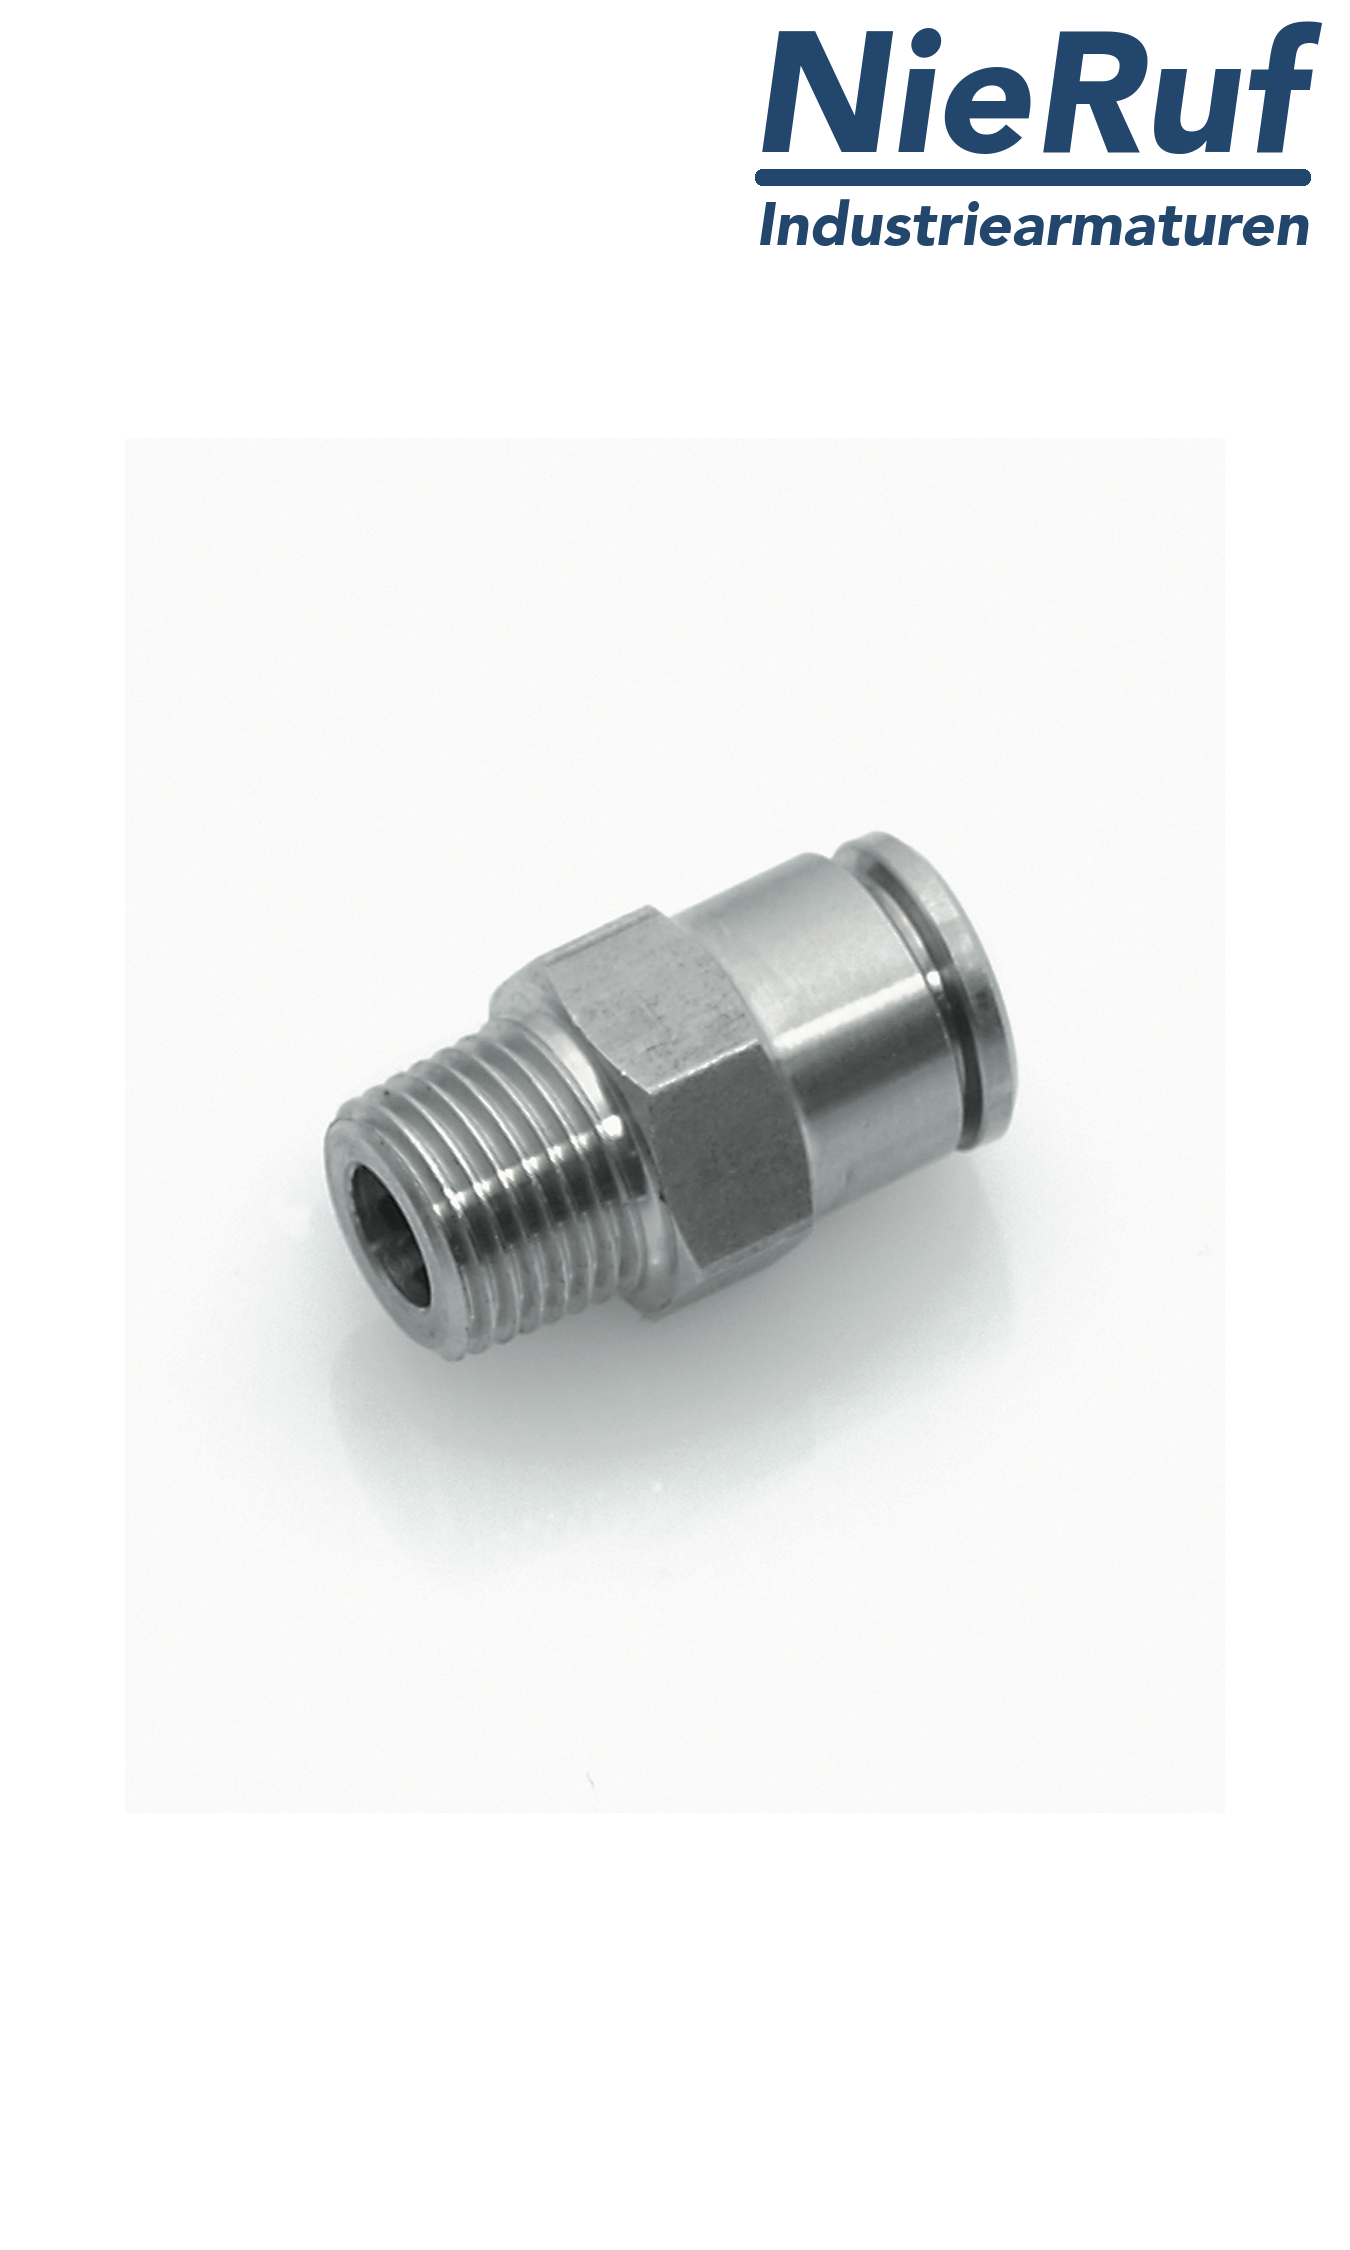 Straight male adaptor EF01 stainless steel FKM R1/4" D10mm